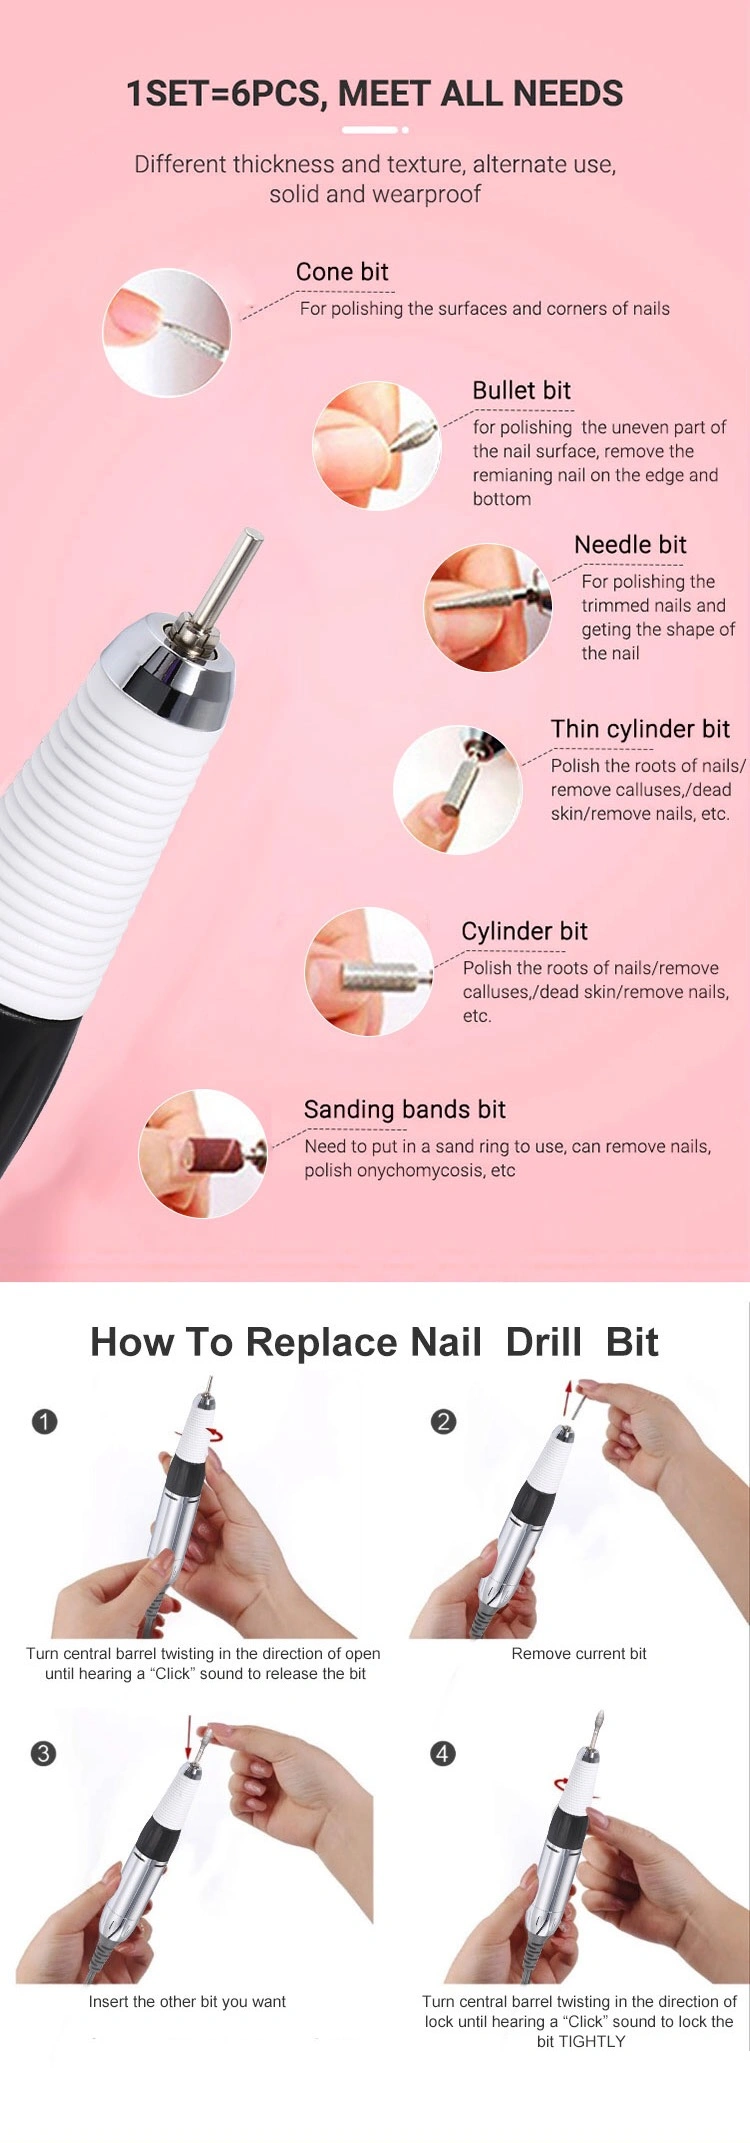 2020 New Manicure Tool Kit Mobile Portable Electric Nail Polish Drill Piece 30000rpm